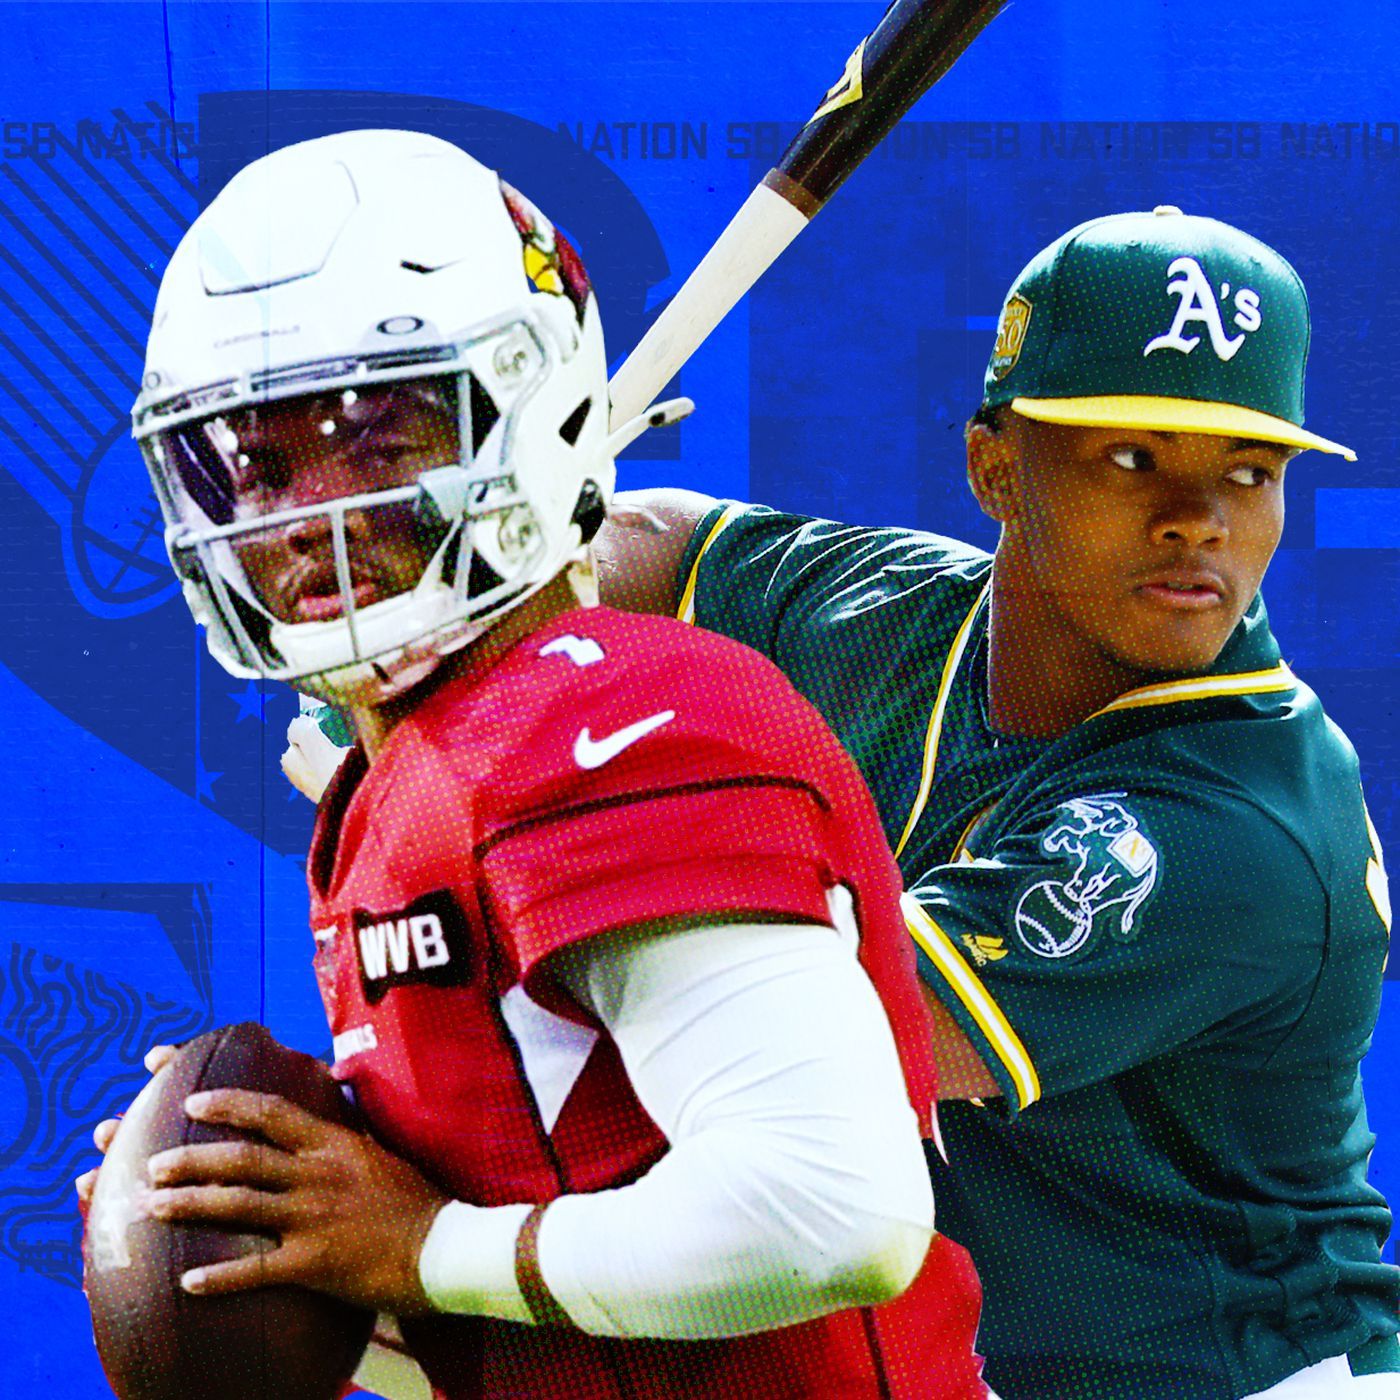 Could Kyler Murray actually play in the NFL and MLB at the same time?